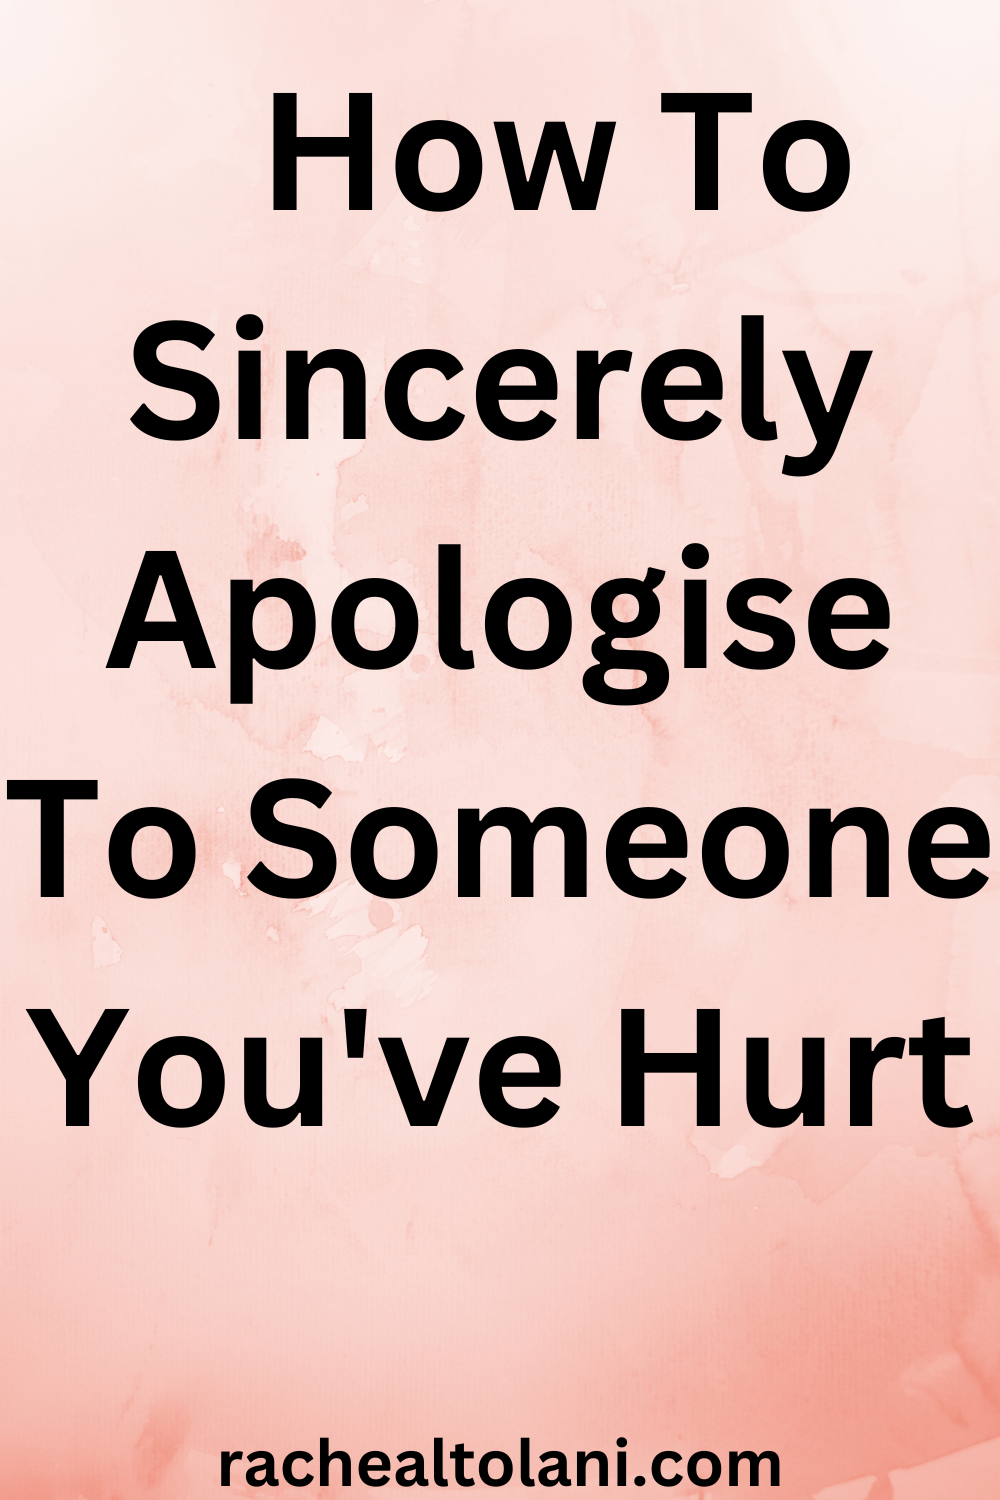 How To Sincerely Apologize to someone you've hurt deeply